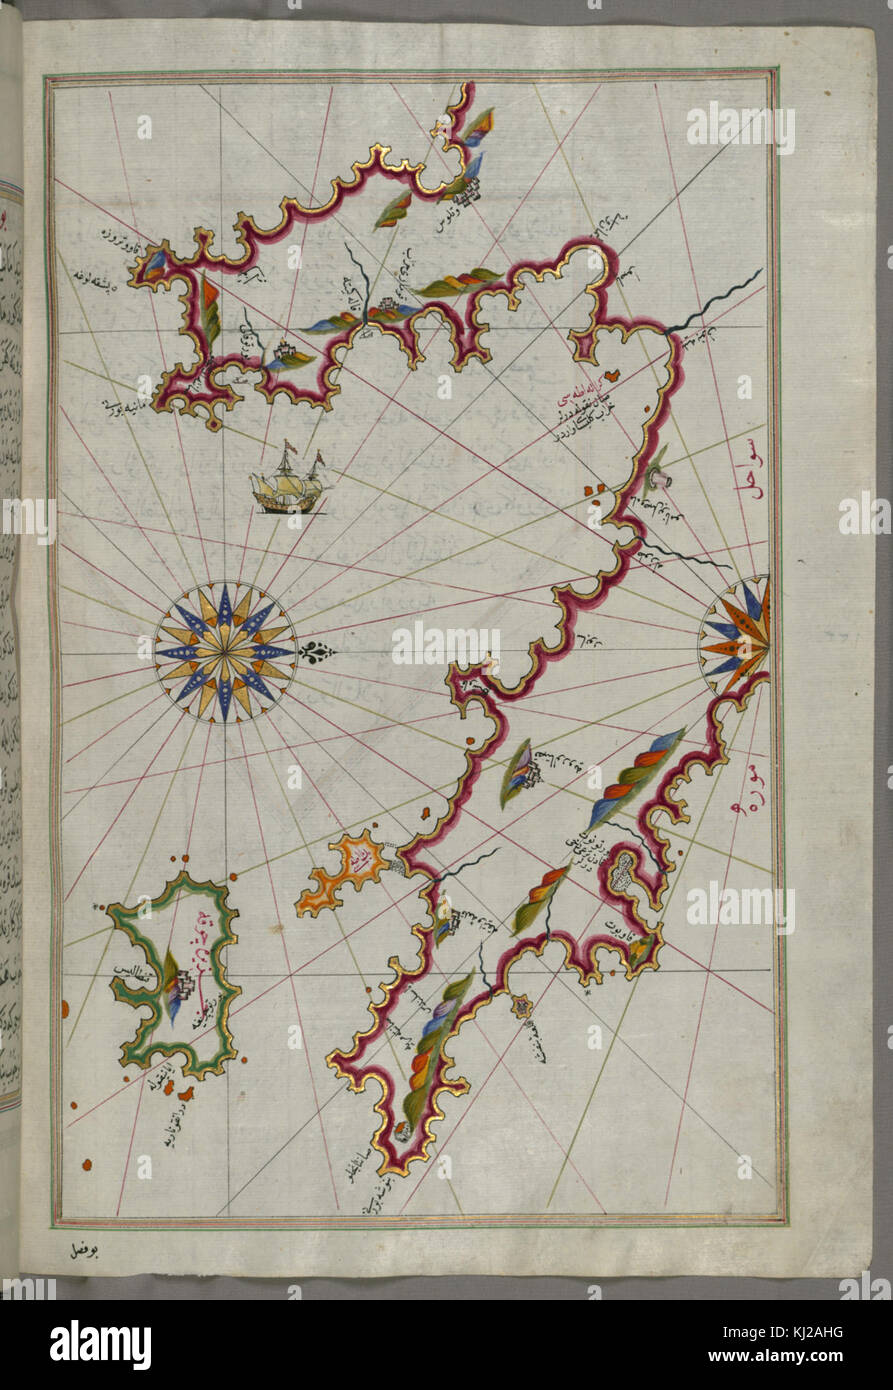 Piri Reis - Map of the Peloponnese Peninsula with the Island of Kythira and the Lakonikos Bay - Walters W658127B - Full Page Stock Photo